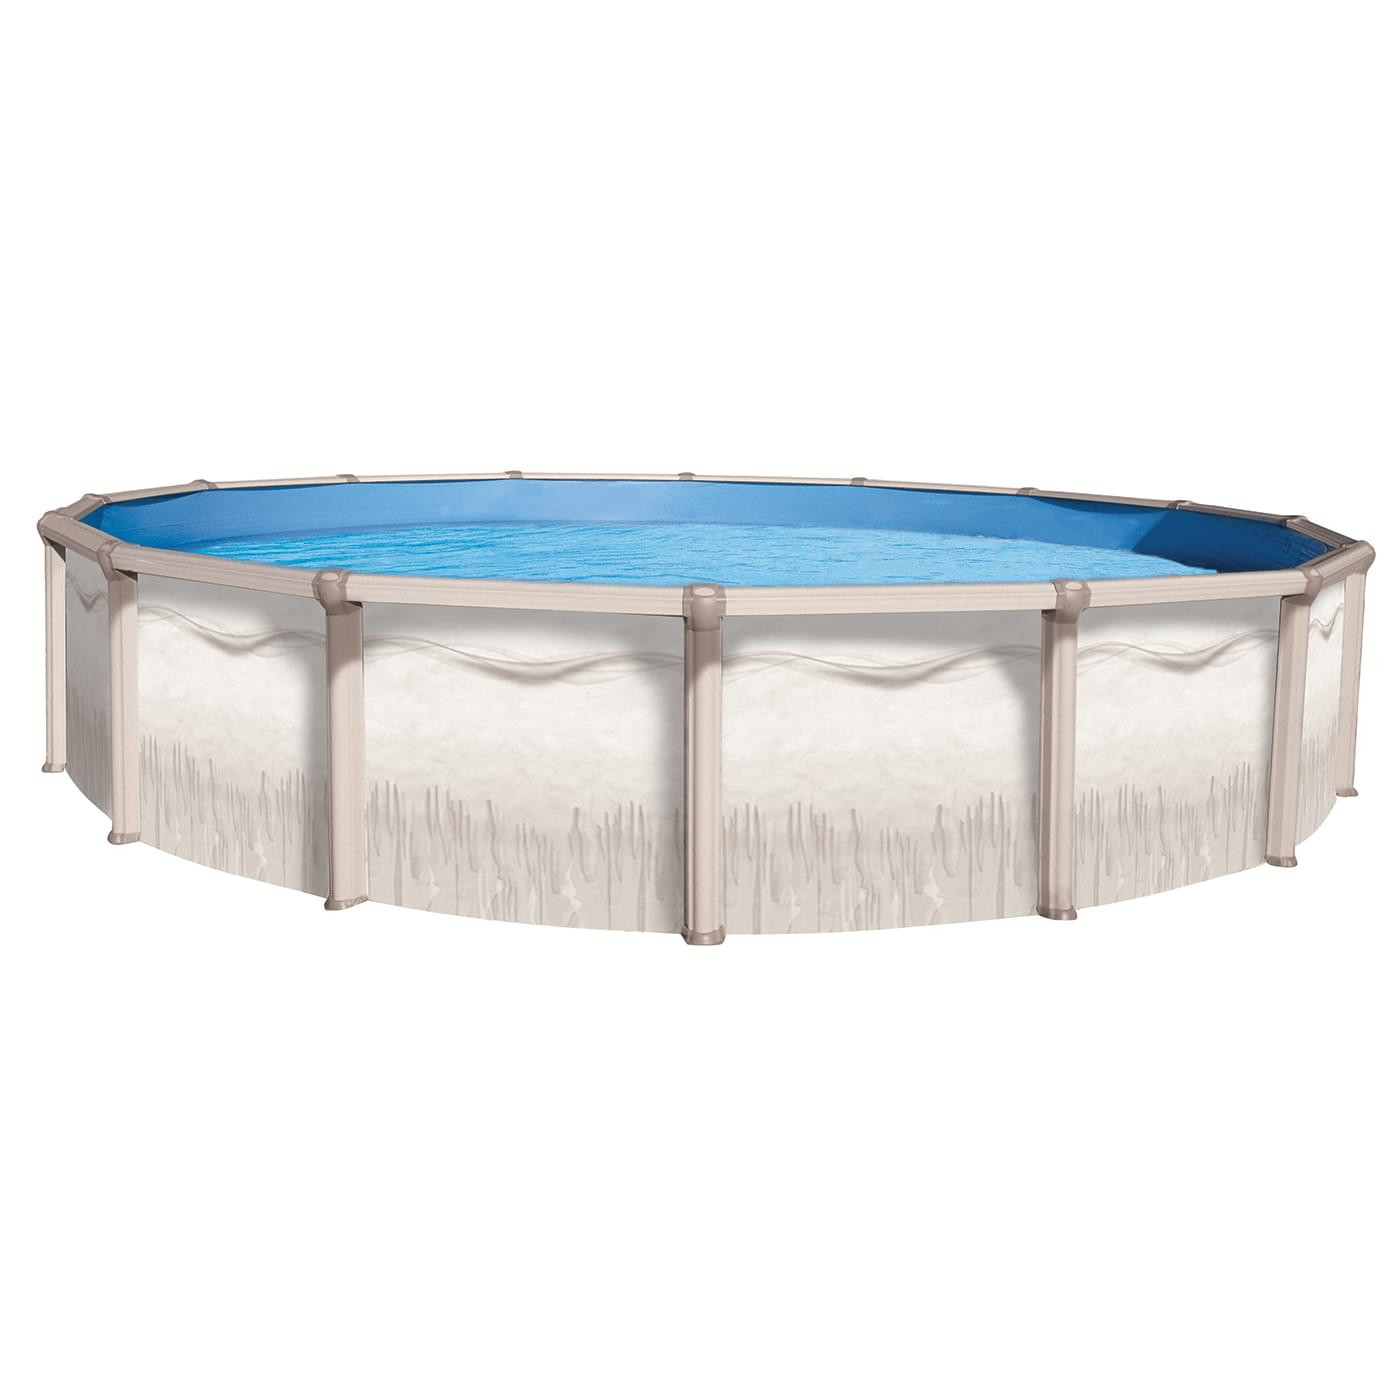 12X24 Above Ground Pool
 Neptune 12 x 24 ft Oval Buttress Free Ground Pool